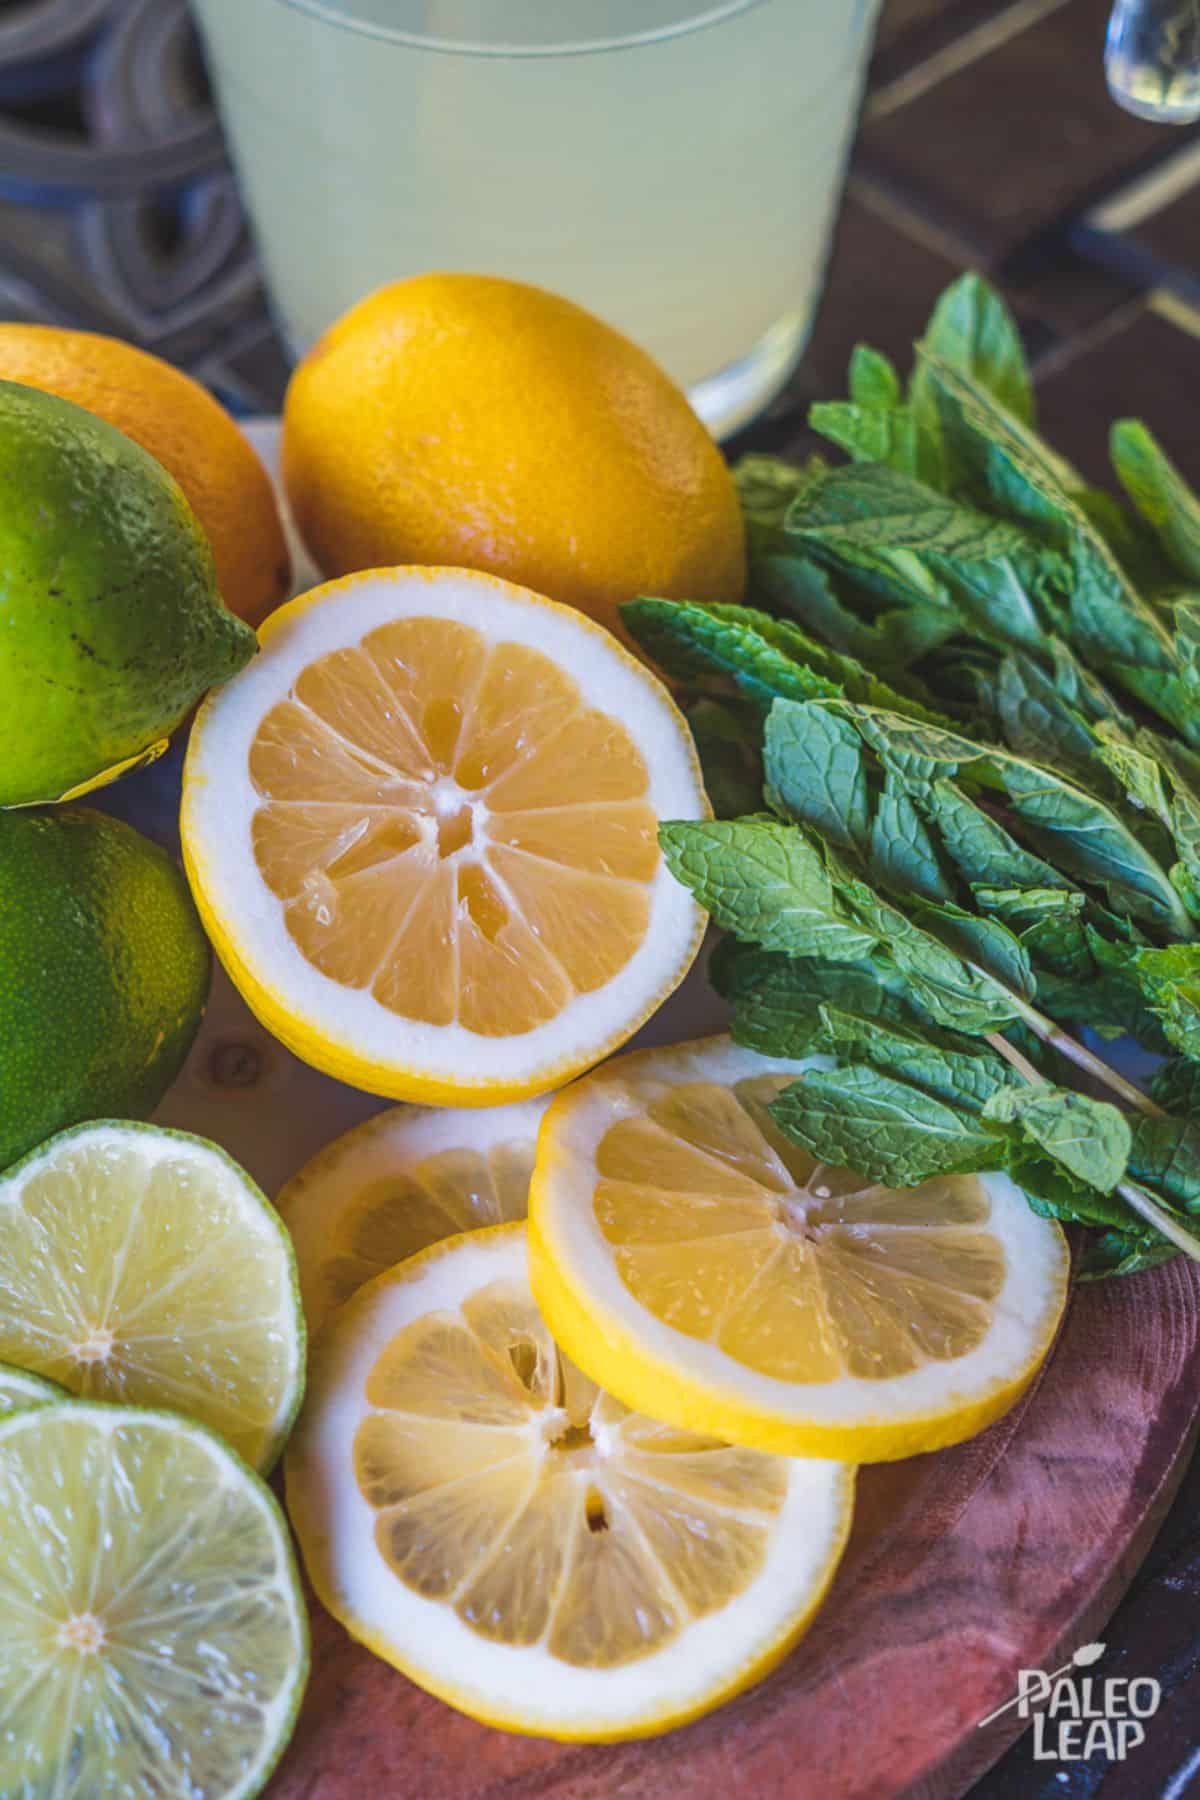 Mint And Citrus Water preparation.